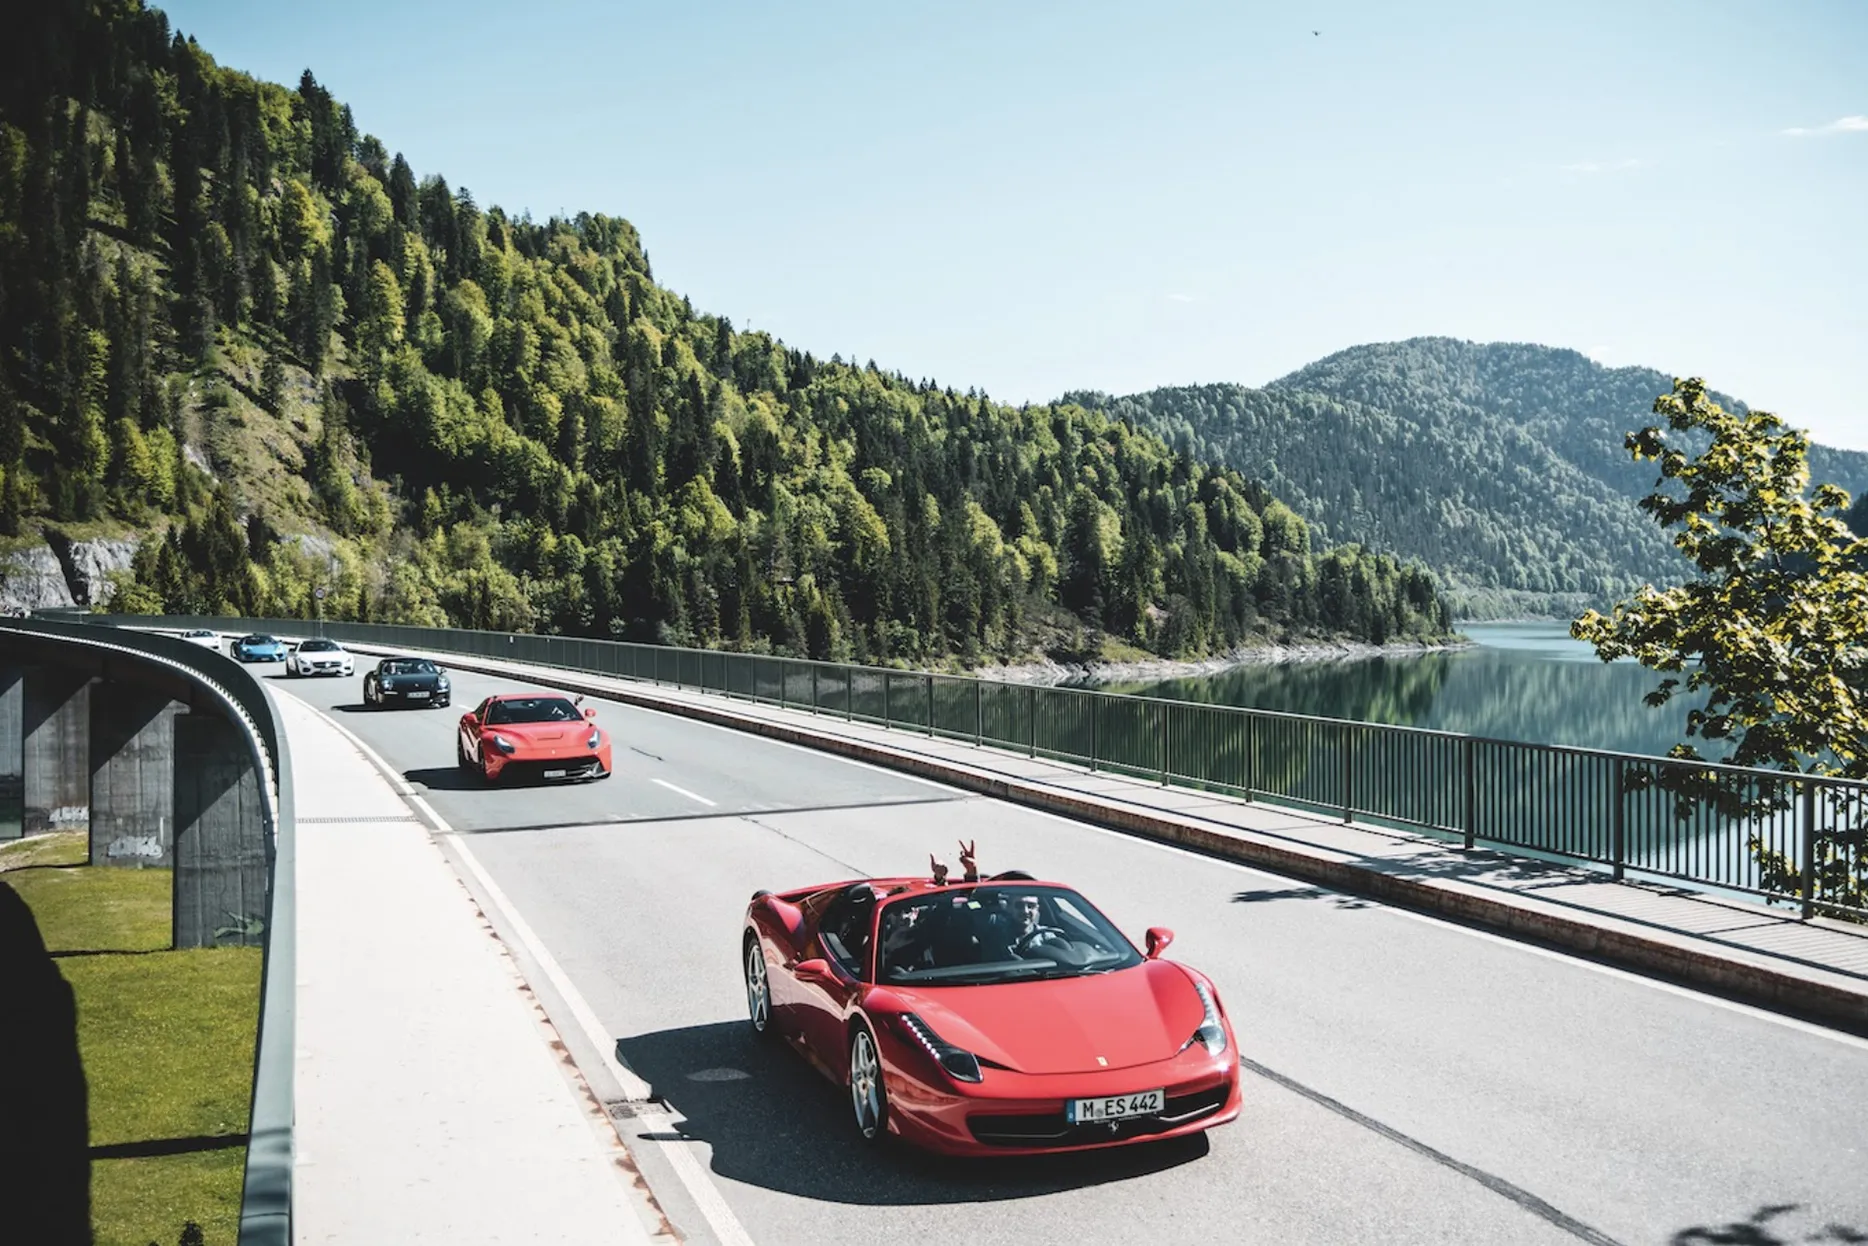 A red Ferrari leads a line of supercars across a bridge in Germany’s Black Forest